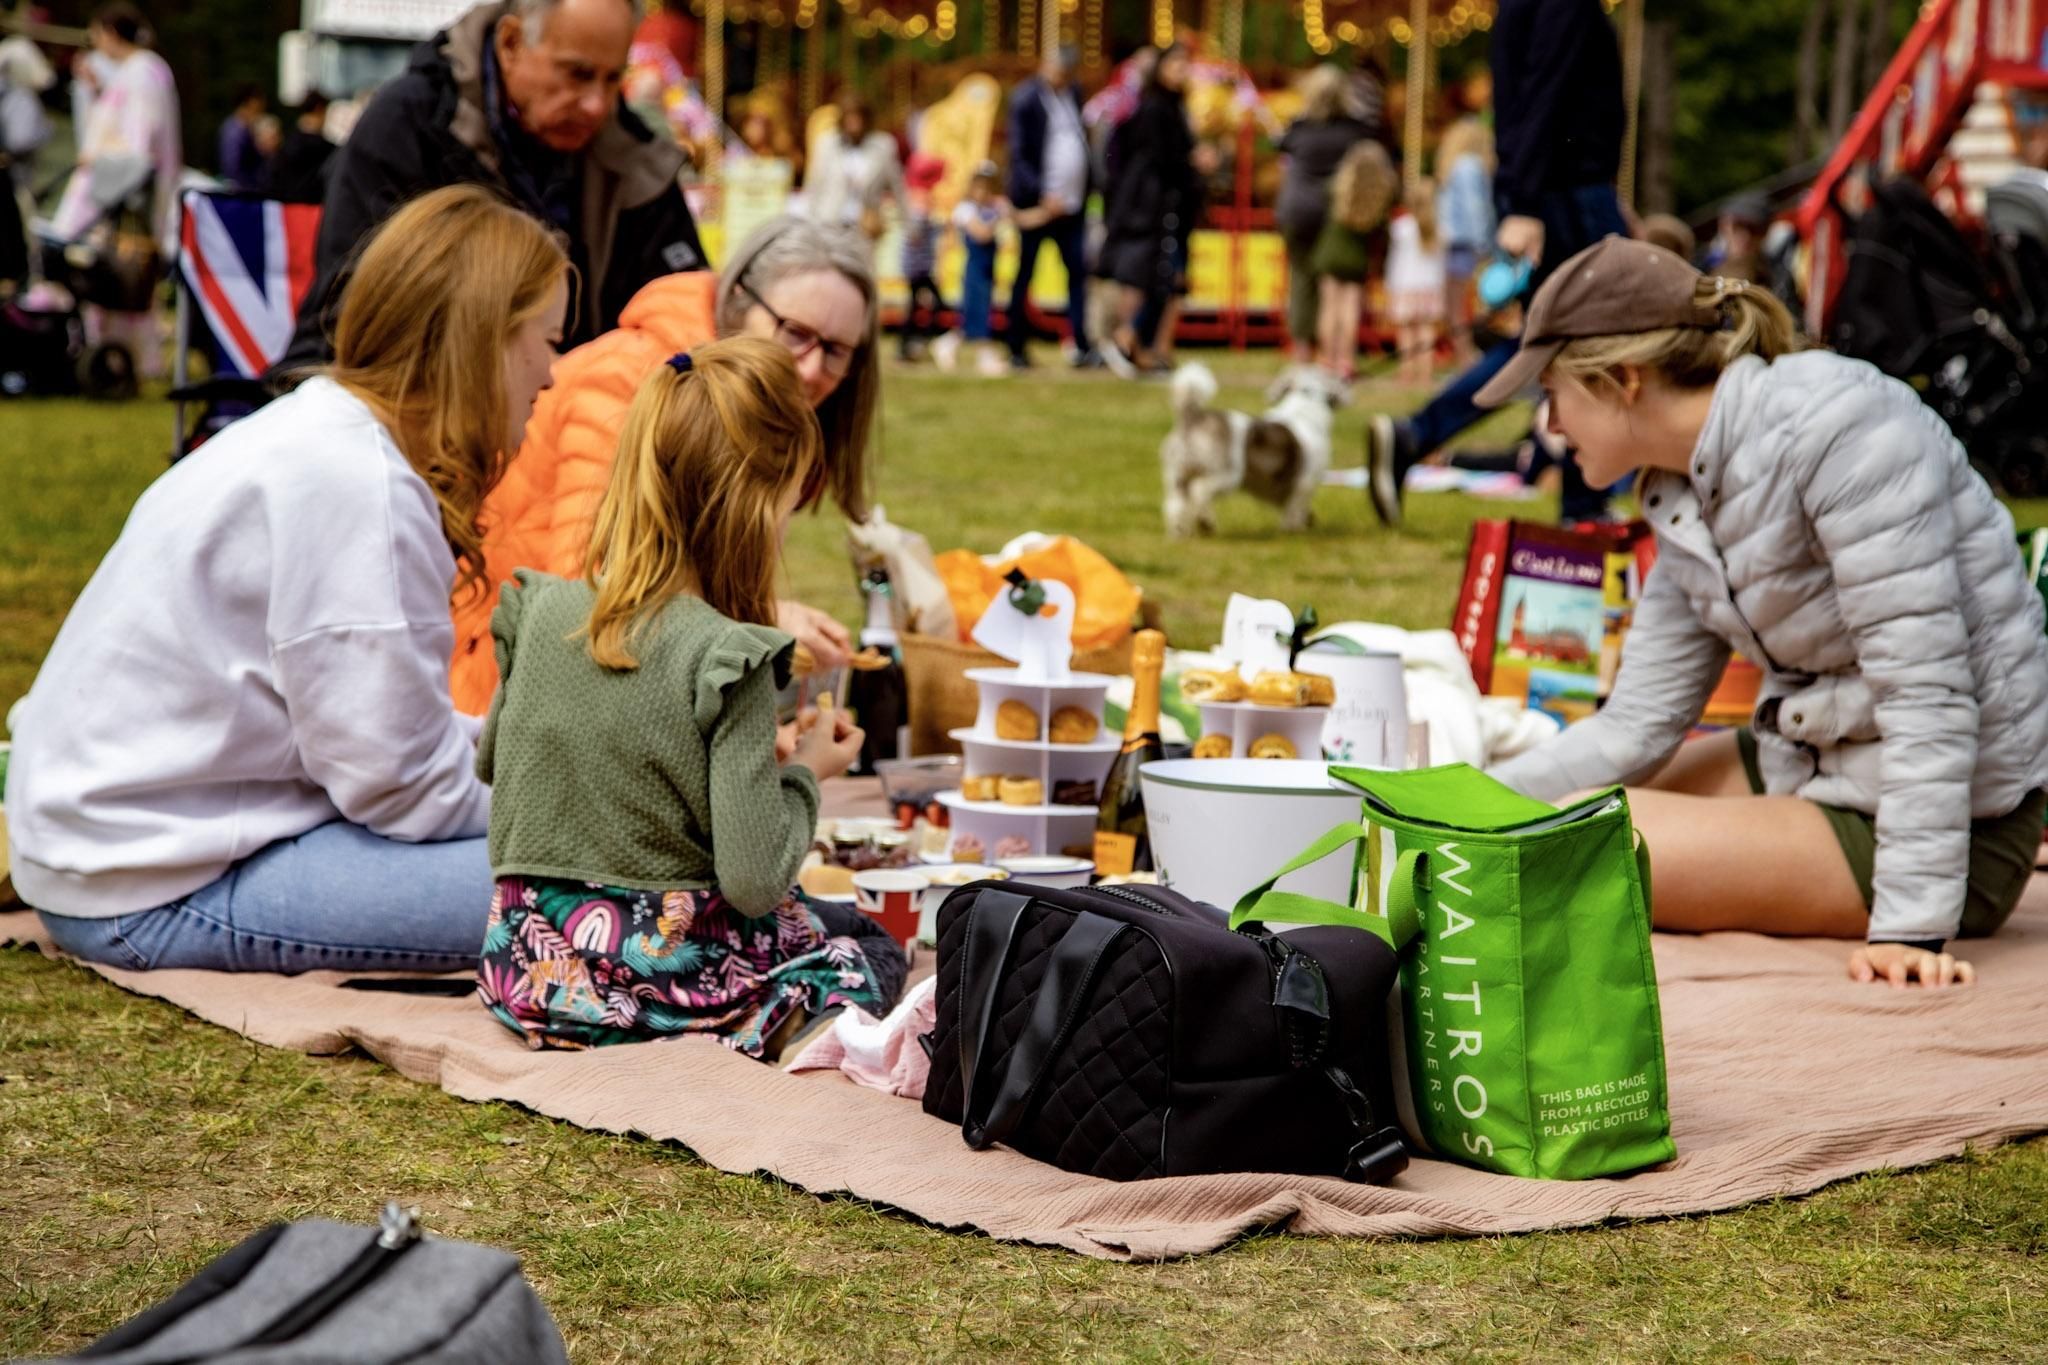 South Beach Camping: Family picnic in Sandringham